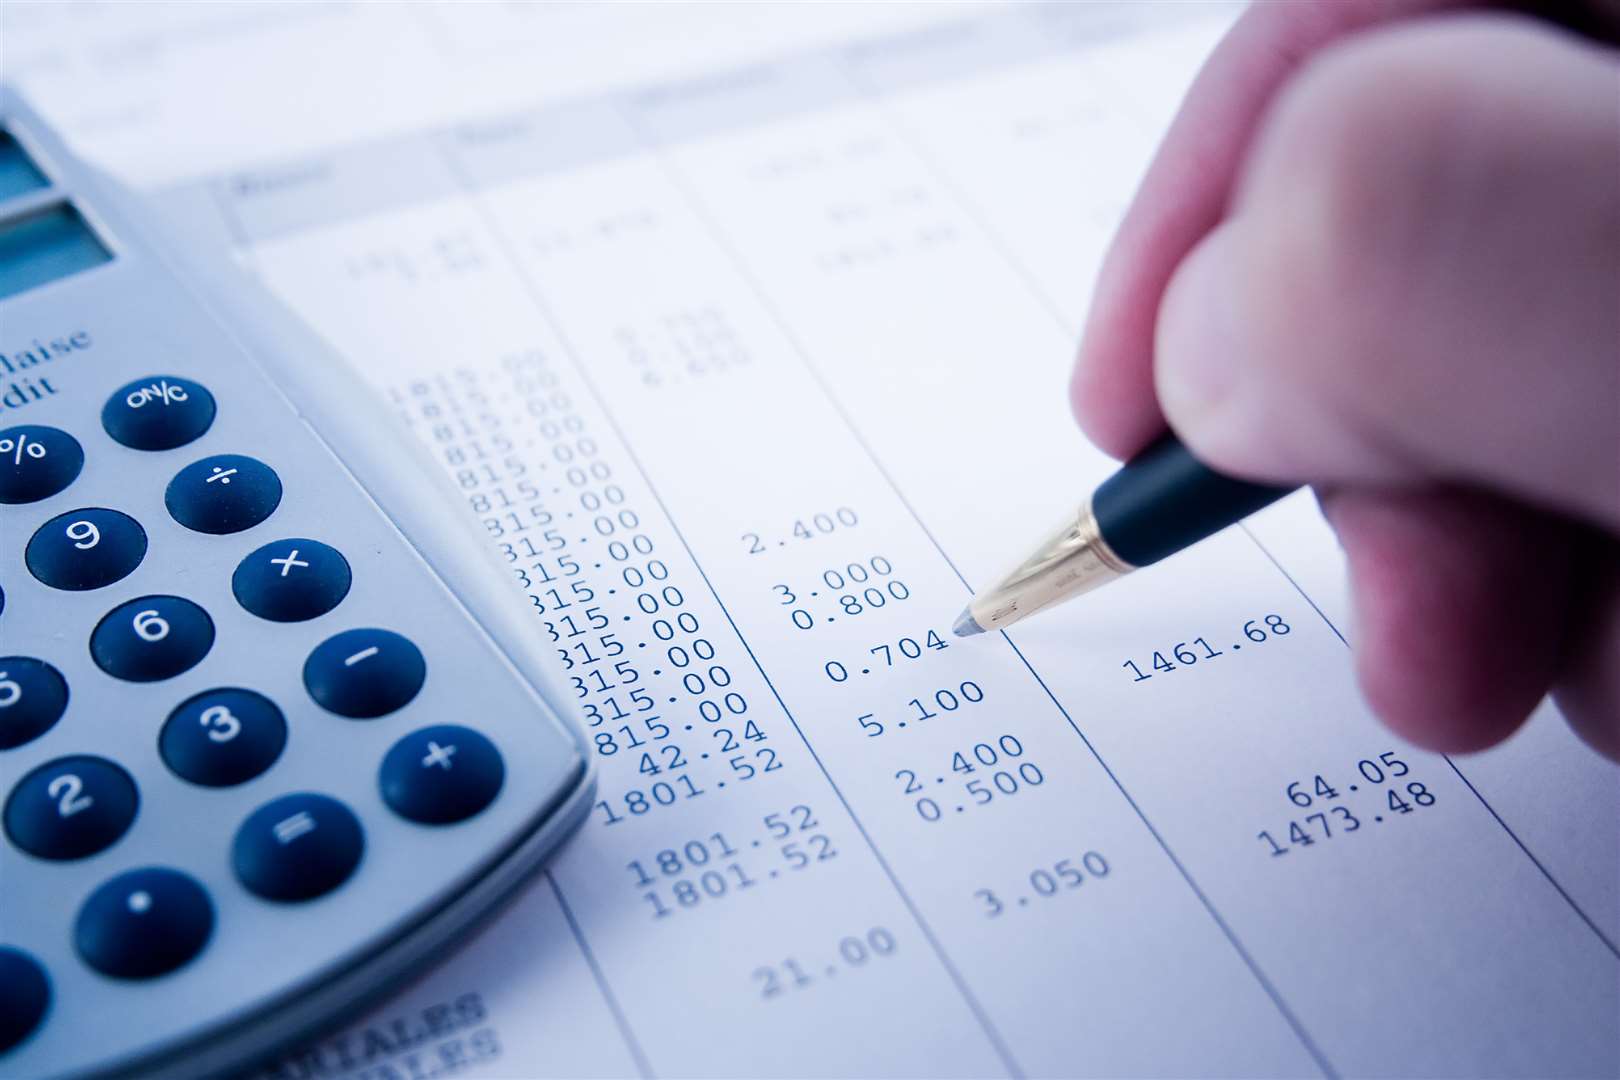 Council tax bills could rise by more than £100. Picture: Thinkstock Image Library